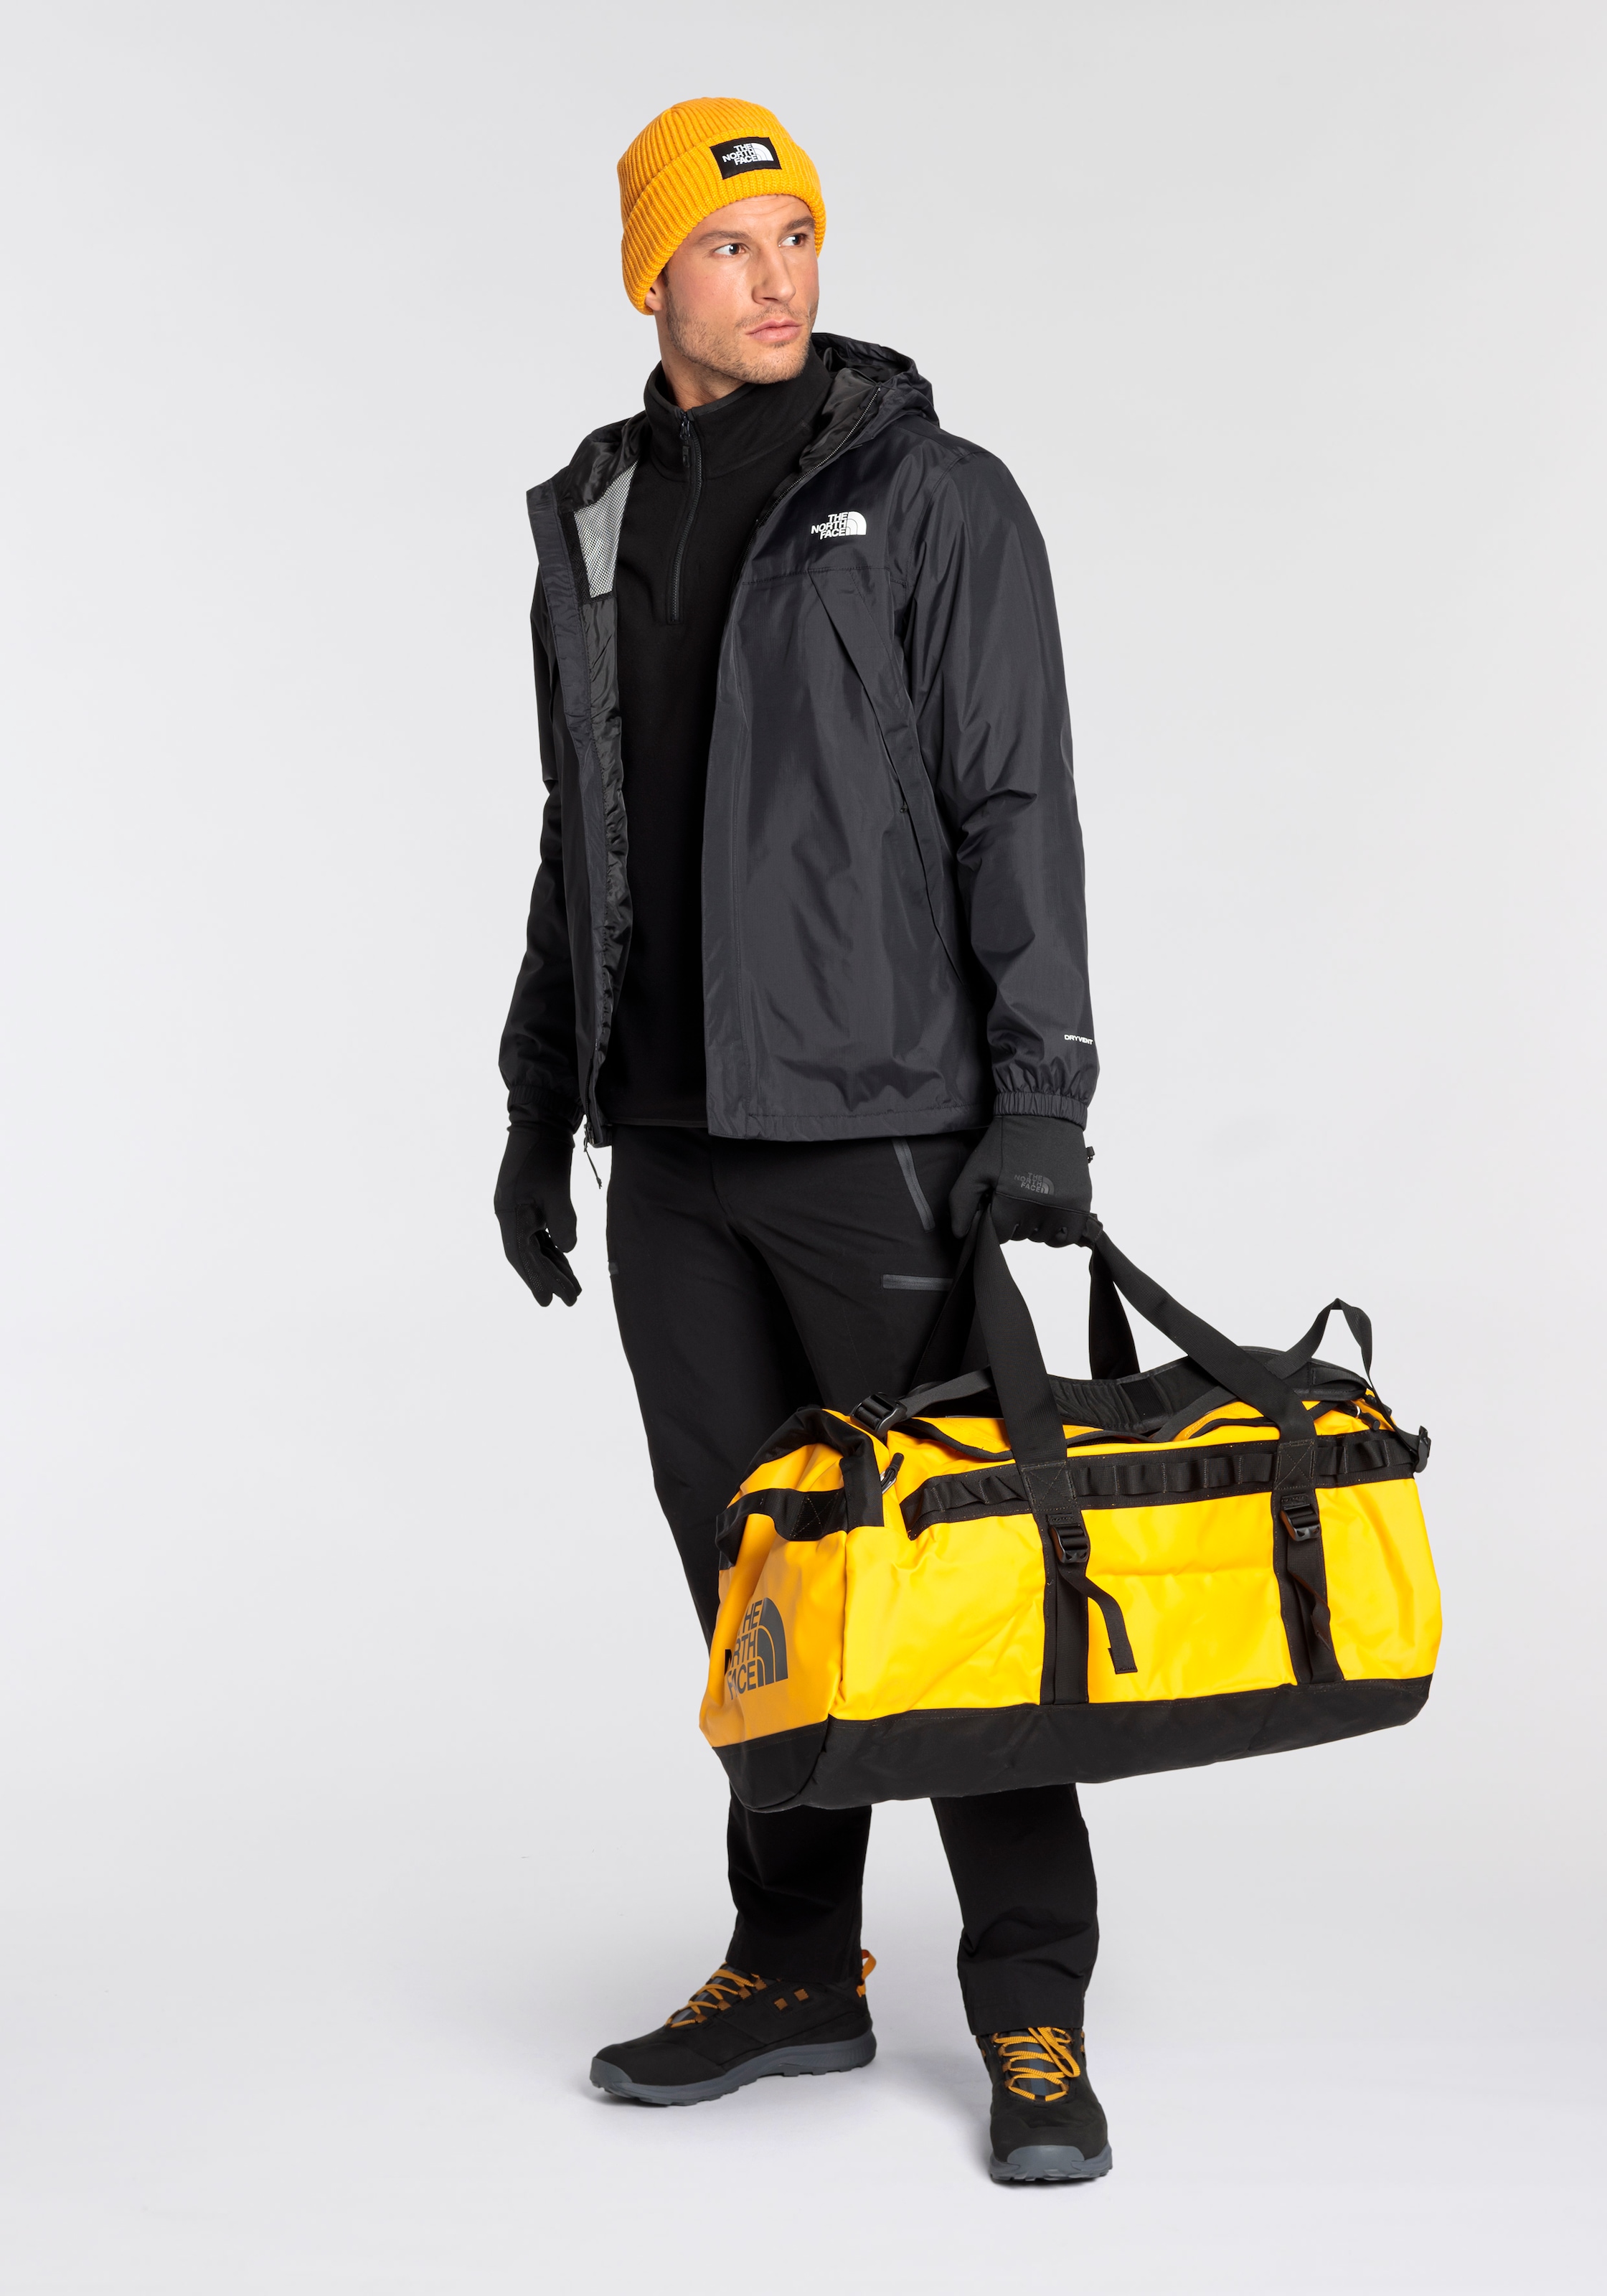 The North Face Reisetasche »B ASE CAMP DUFFEL«